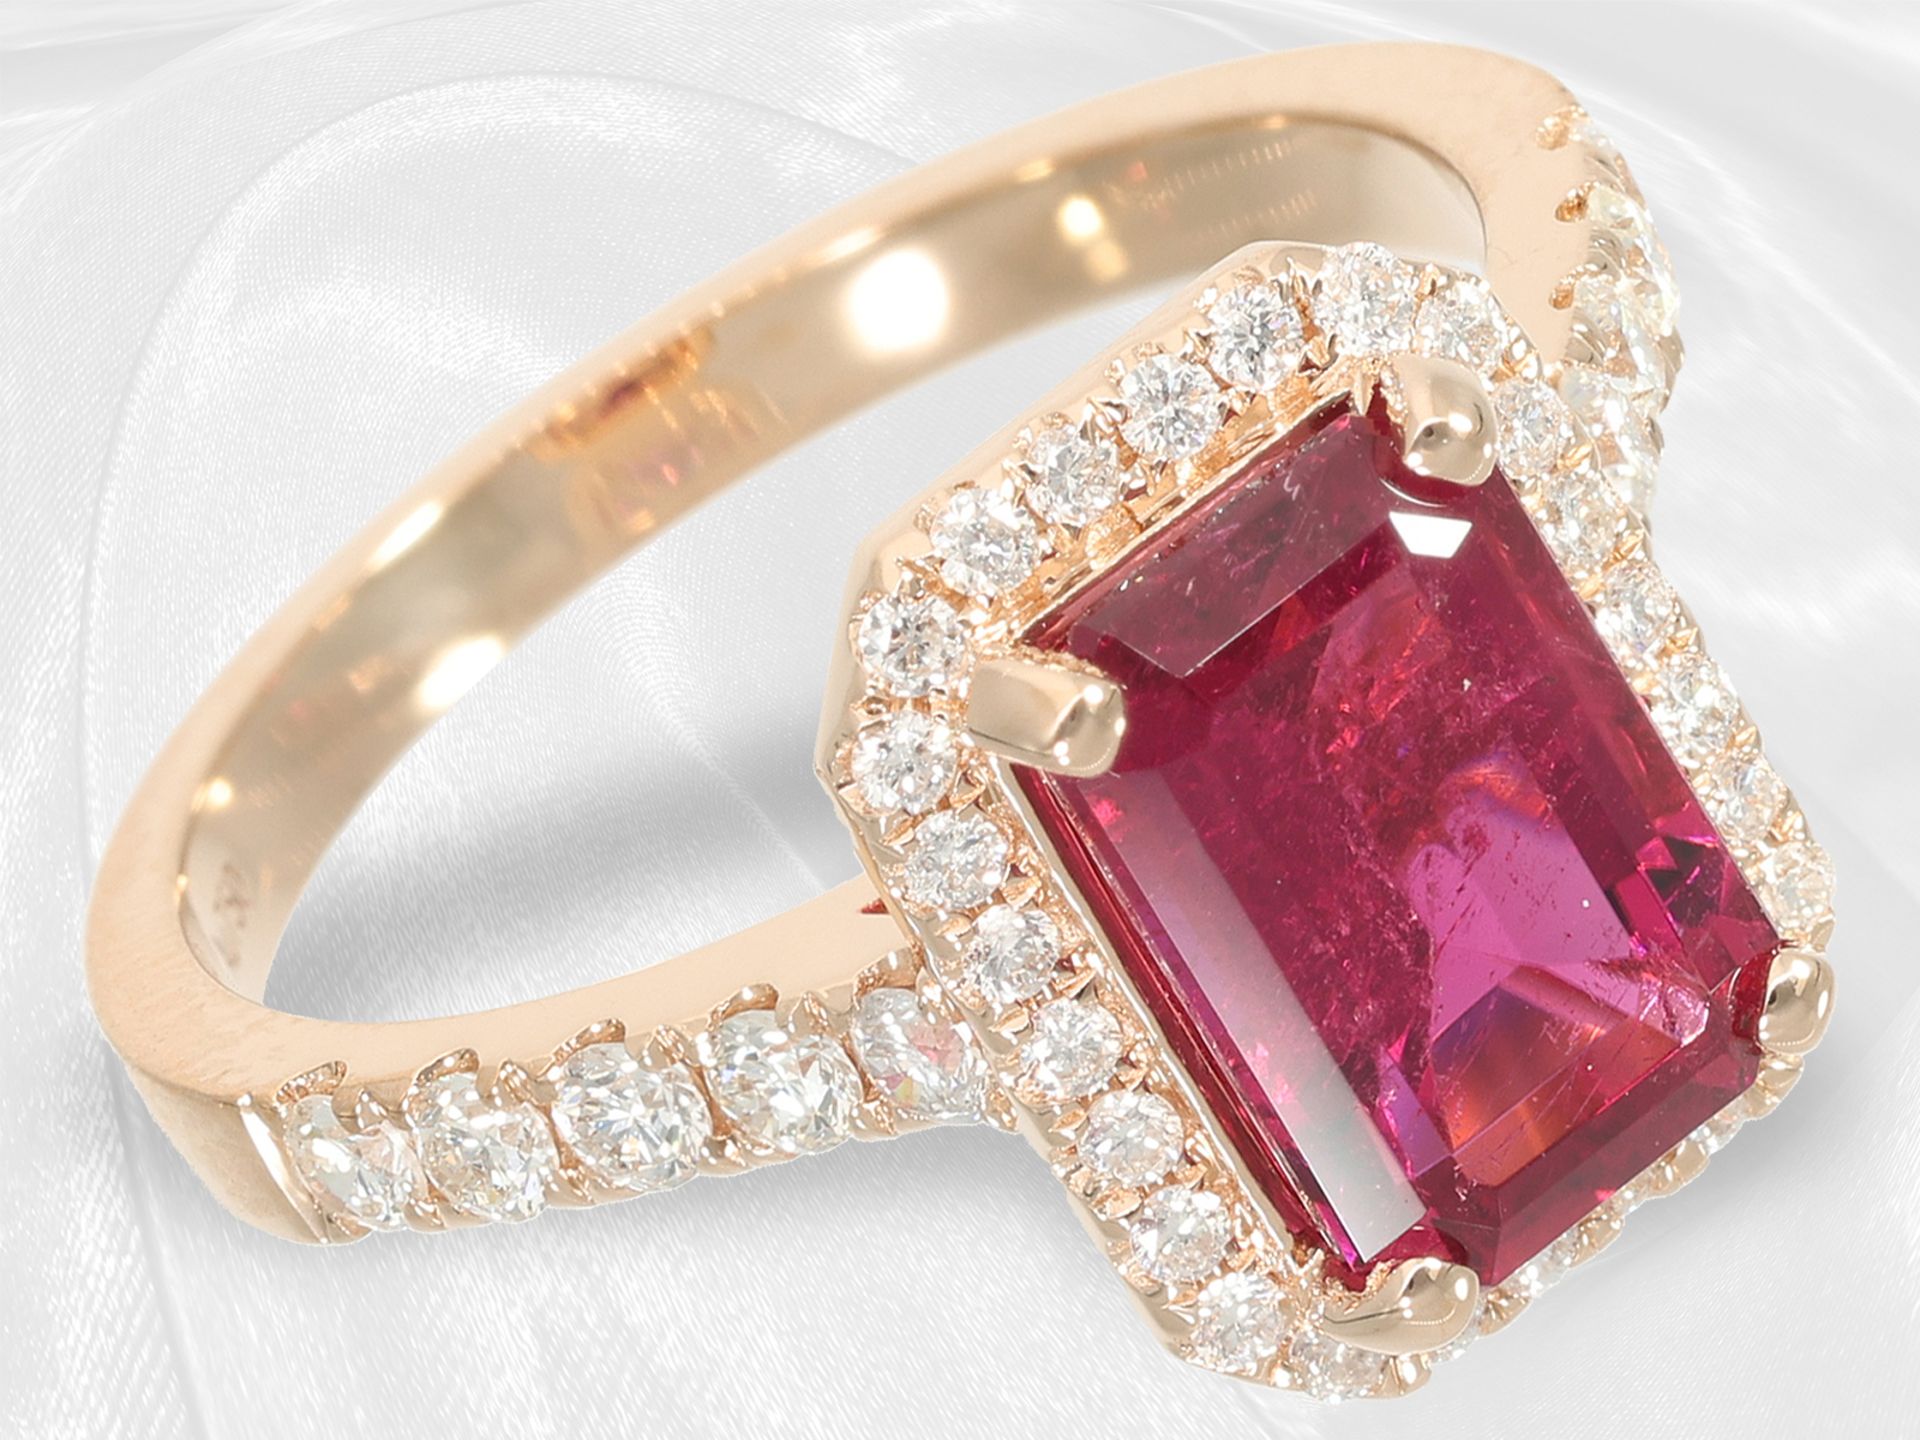 Precious, like new and very beautiful rubellite/brilliant-cut diamond goldsmith ring, 18K pink gold - Image 4 of 4